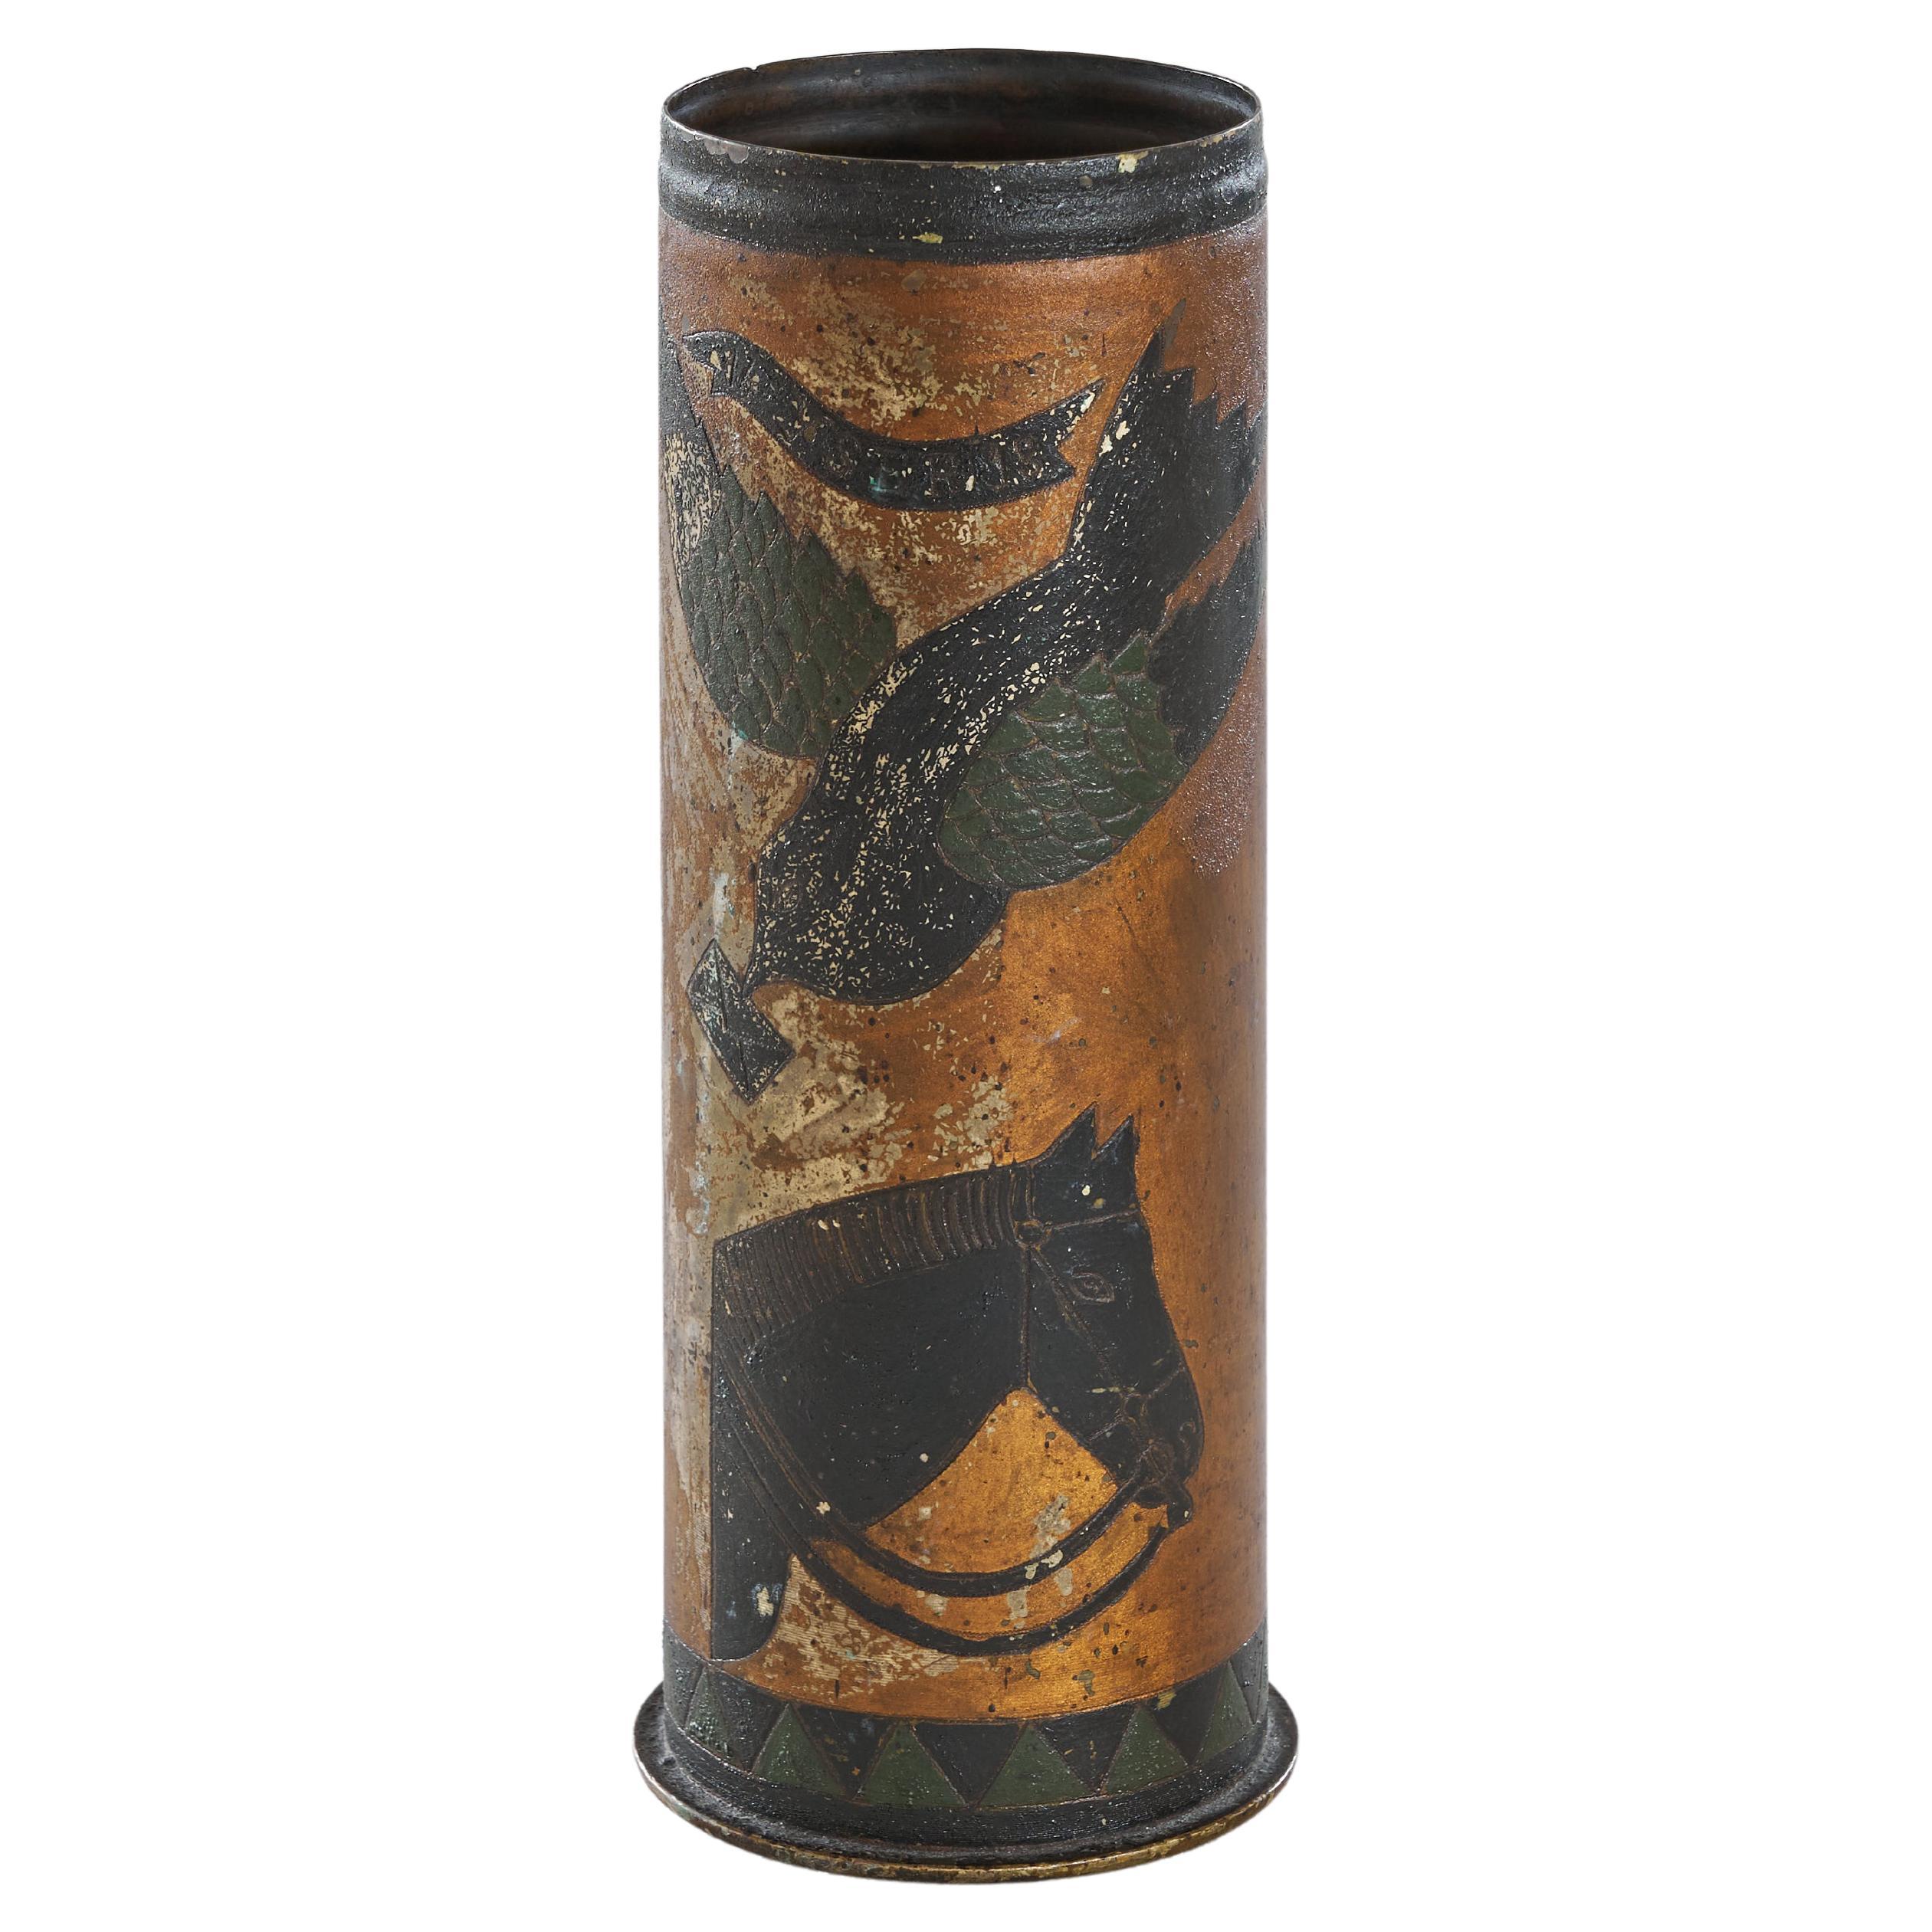 Highly Decorative WWI Bombshell Trench Art Vase For Sale